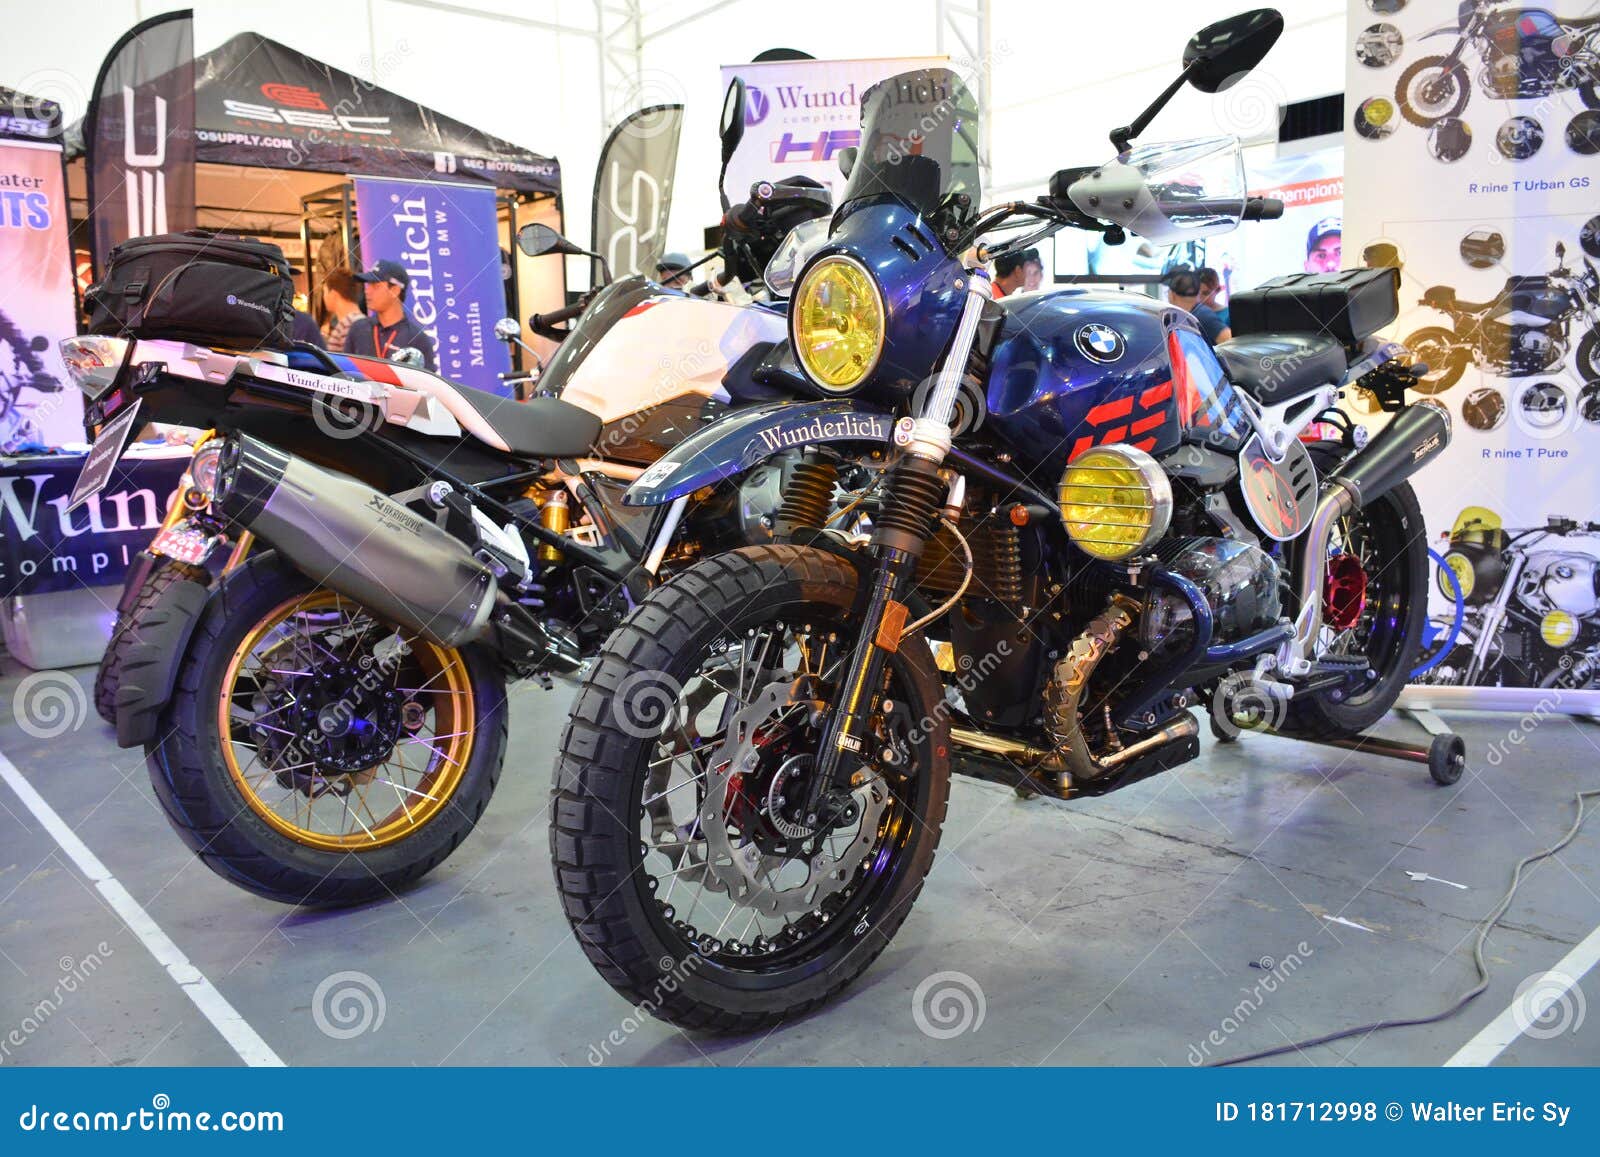 BMW Motorcycle at Ride Ph Motorcycle Show in Pasig, Philippines